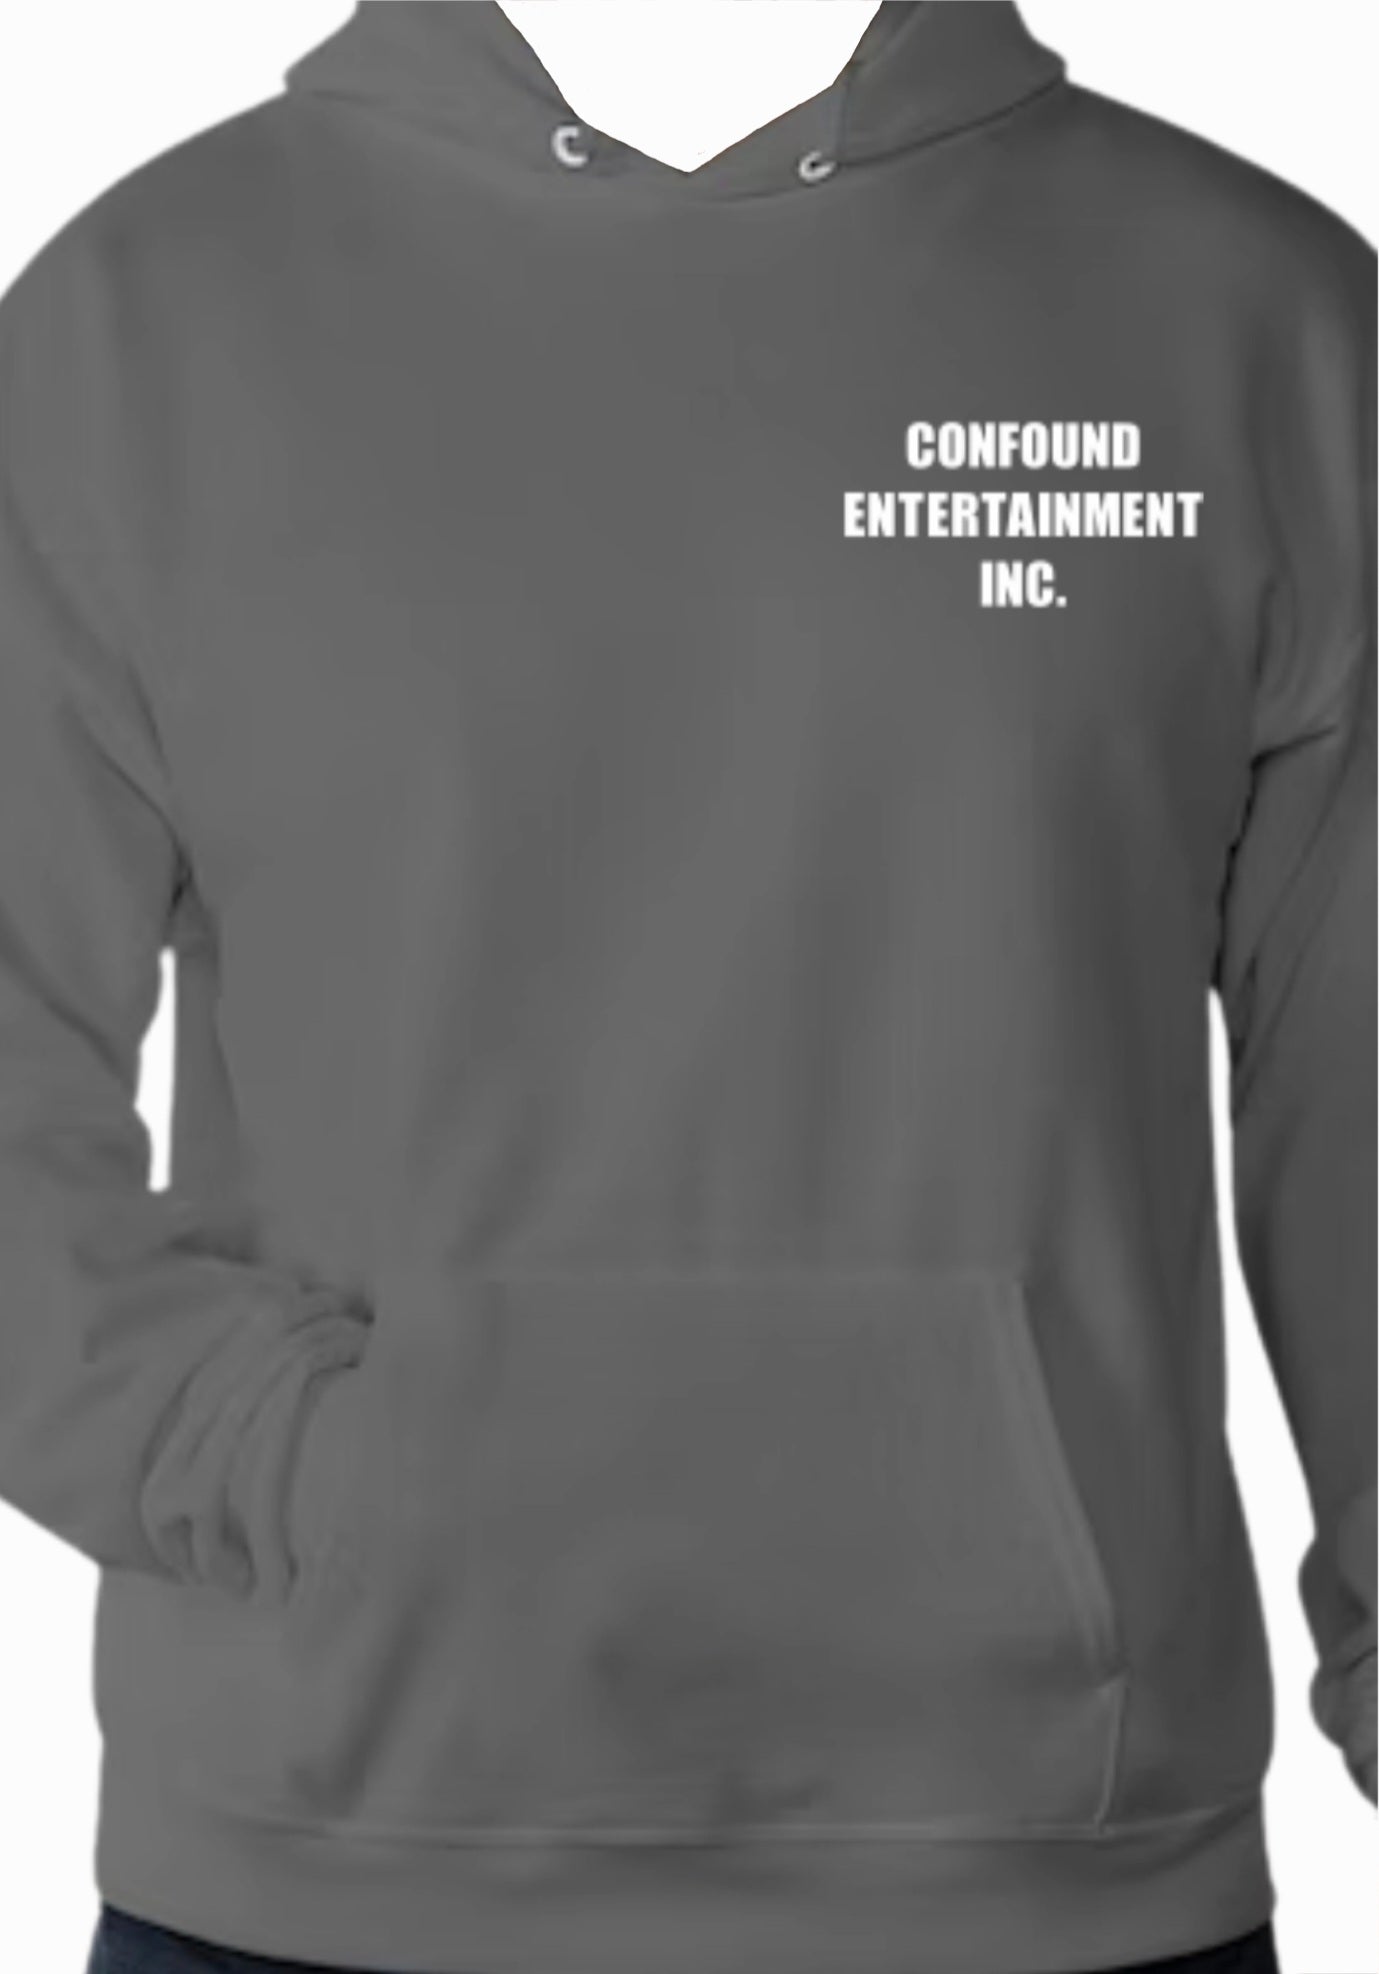 "Confound Entertainment Inc." Sweaters